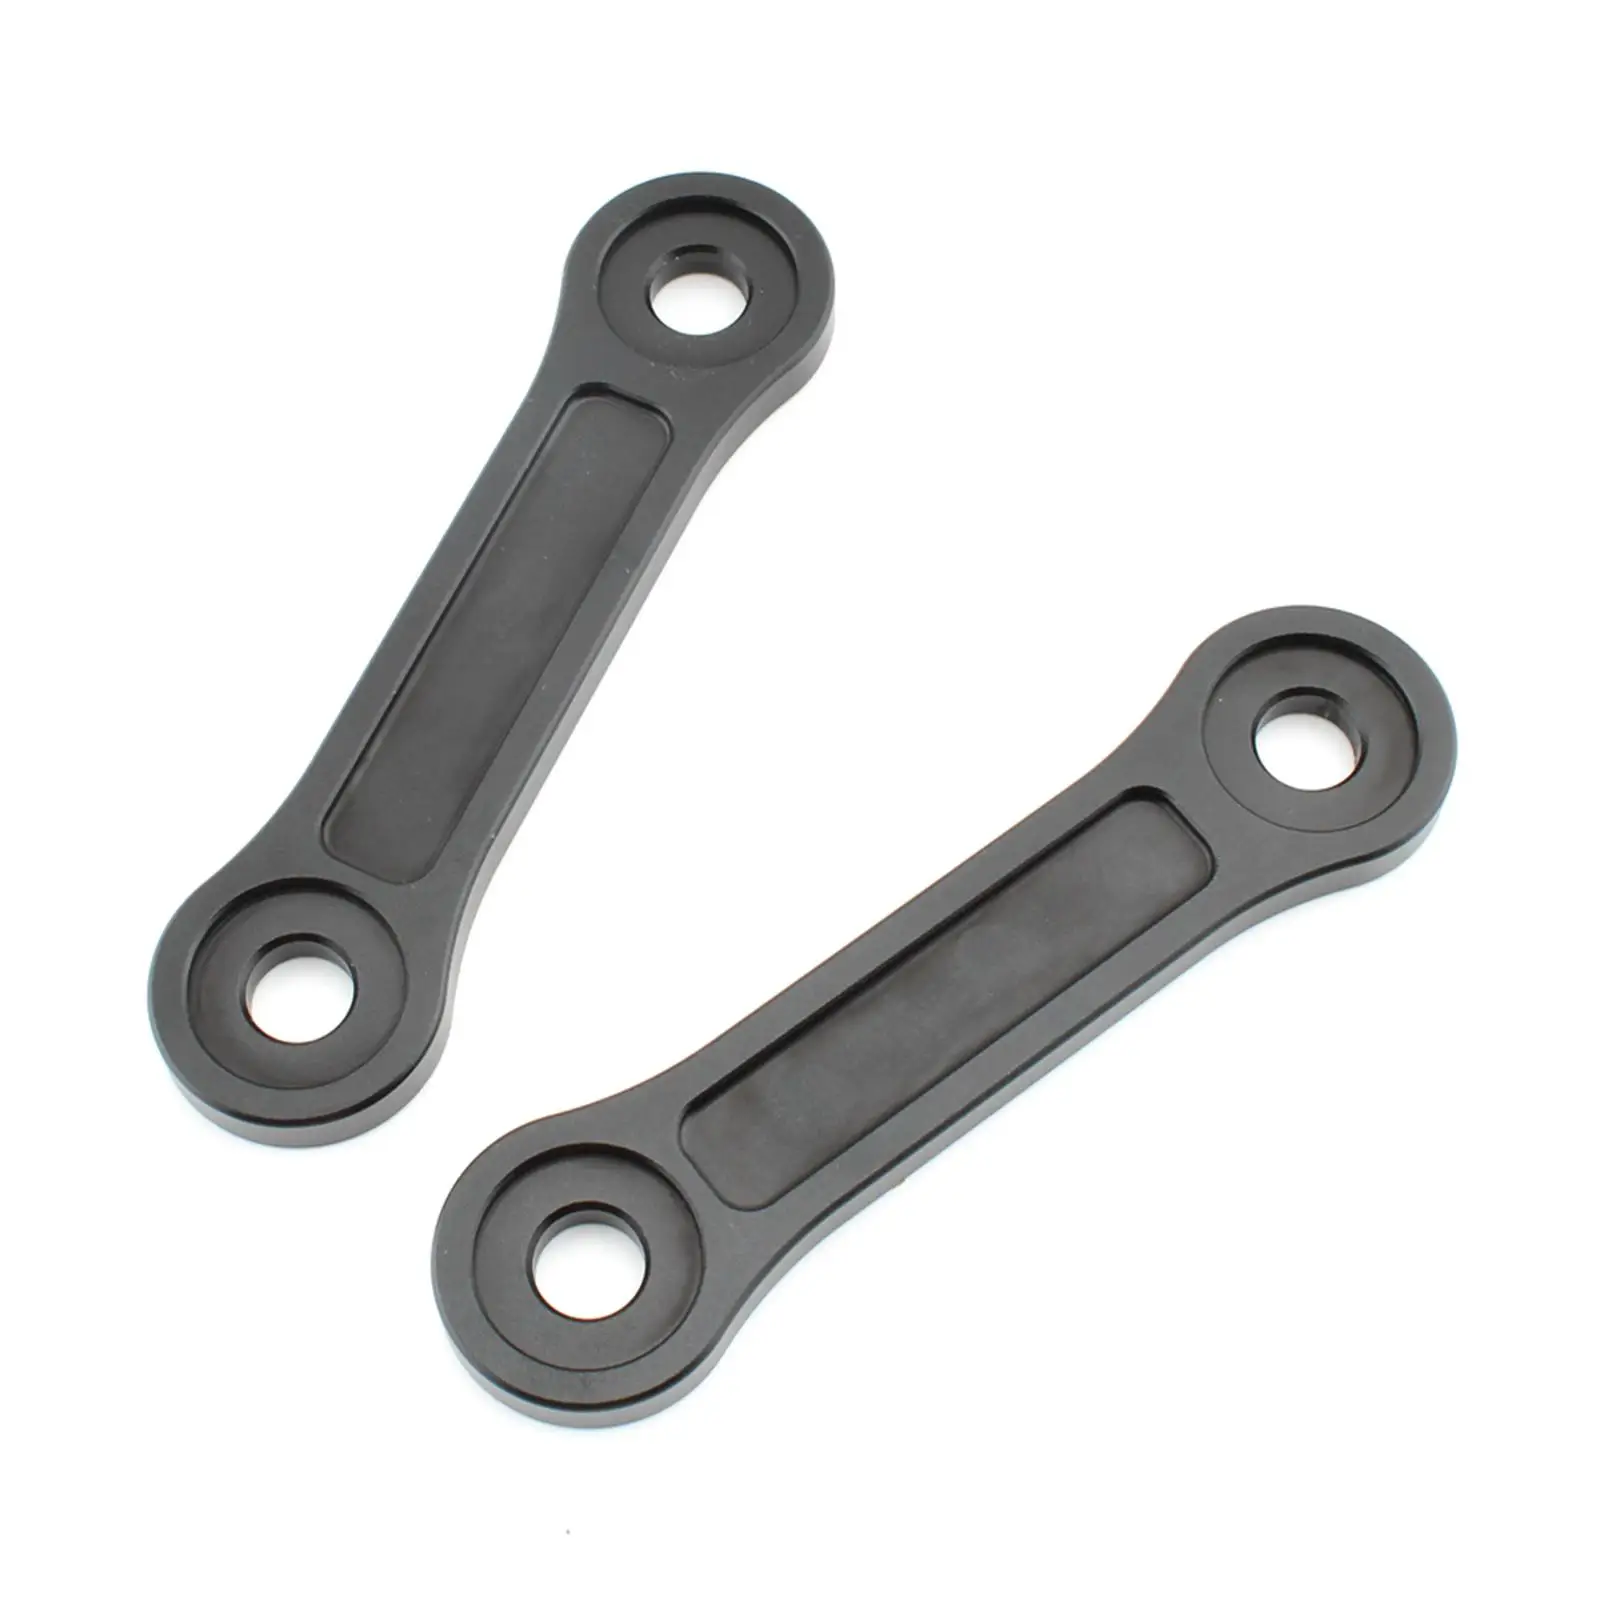 2Pcs Motorcycle Suspension Lowering Links Kit Reinforced Durable Linkage Drop Link Kit for Tiger 1200 GT Pro Rally Explorer